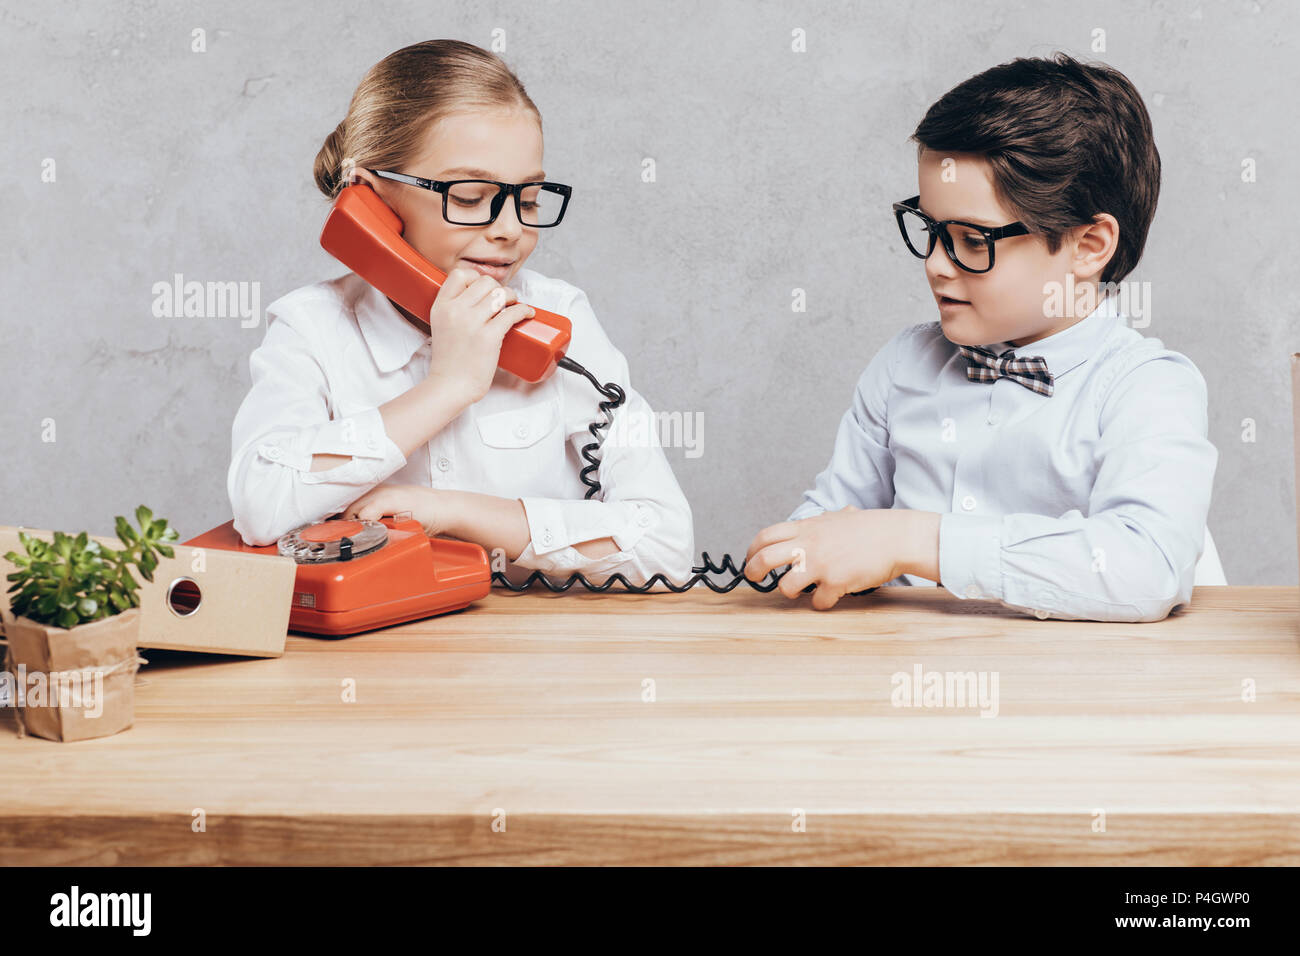 portrait of little girl talking on telephone while boy sitting near by at workplace Stock Photo